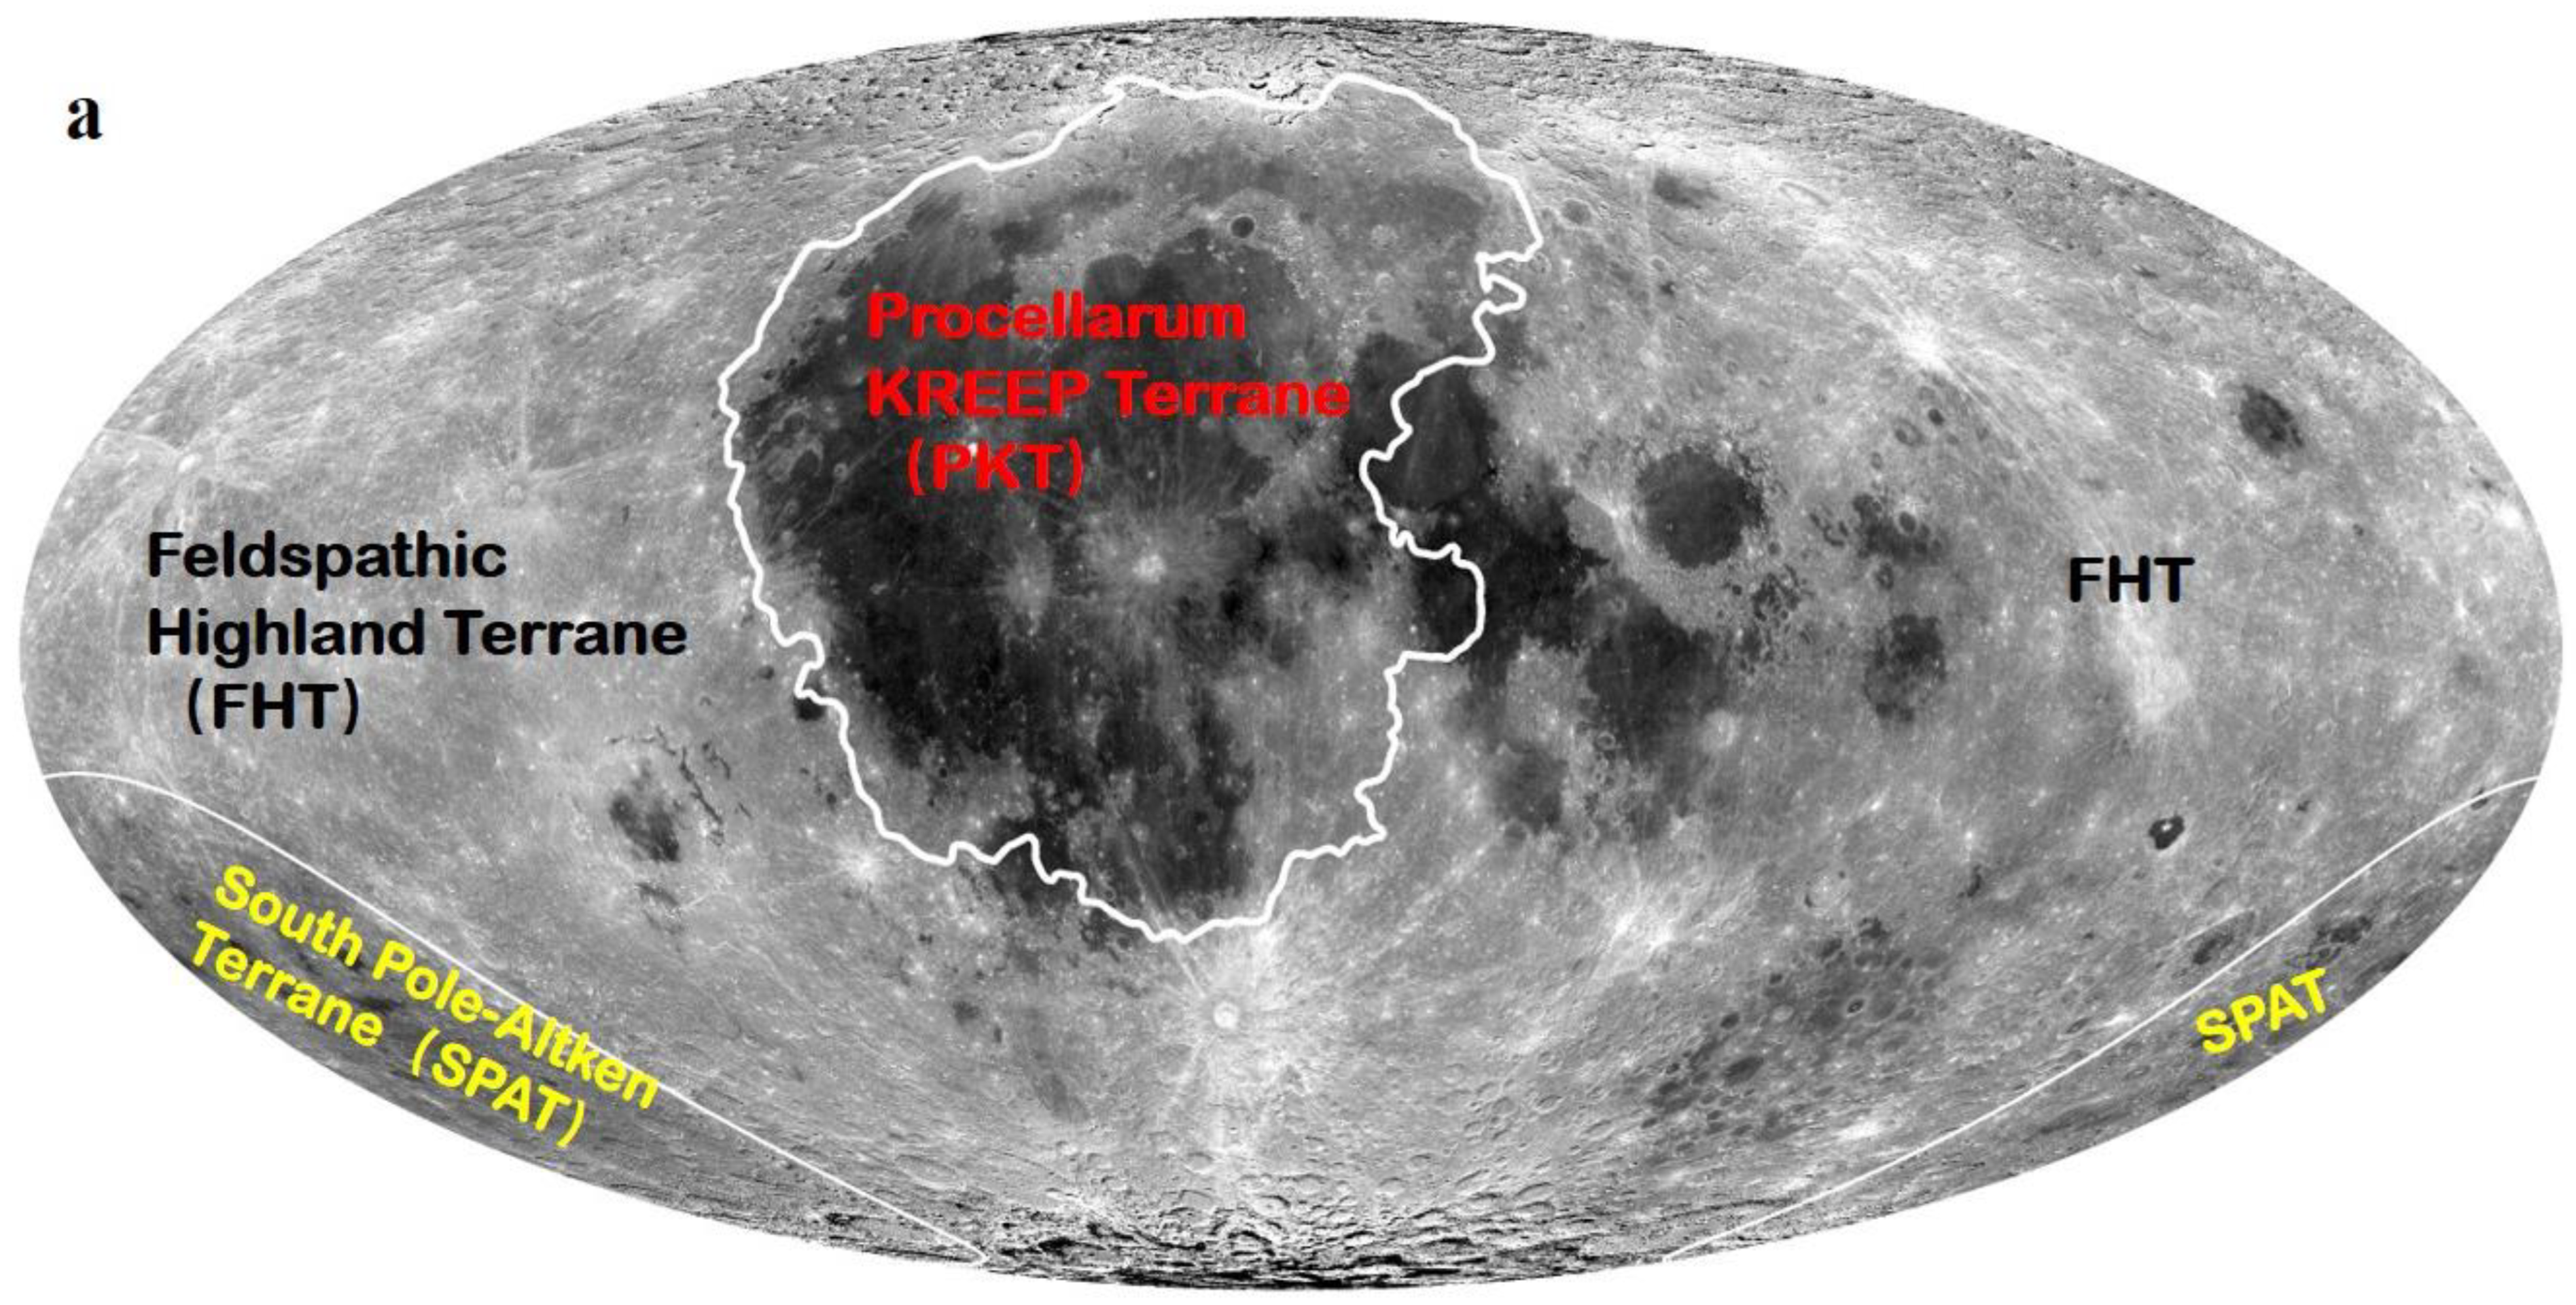 Remote Sensing | Free Full-Text | Lunar Procellarum KREEP Terrane (PKT)  Stratigraphy and Structure with Depth: Evidence for Significantly Decreased  Th Concentrations and Thermal Evolution Consequences